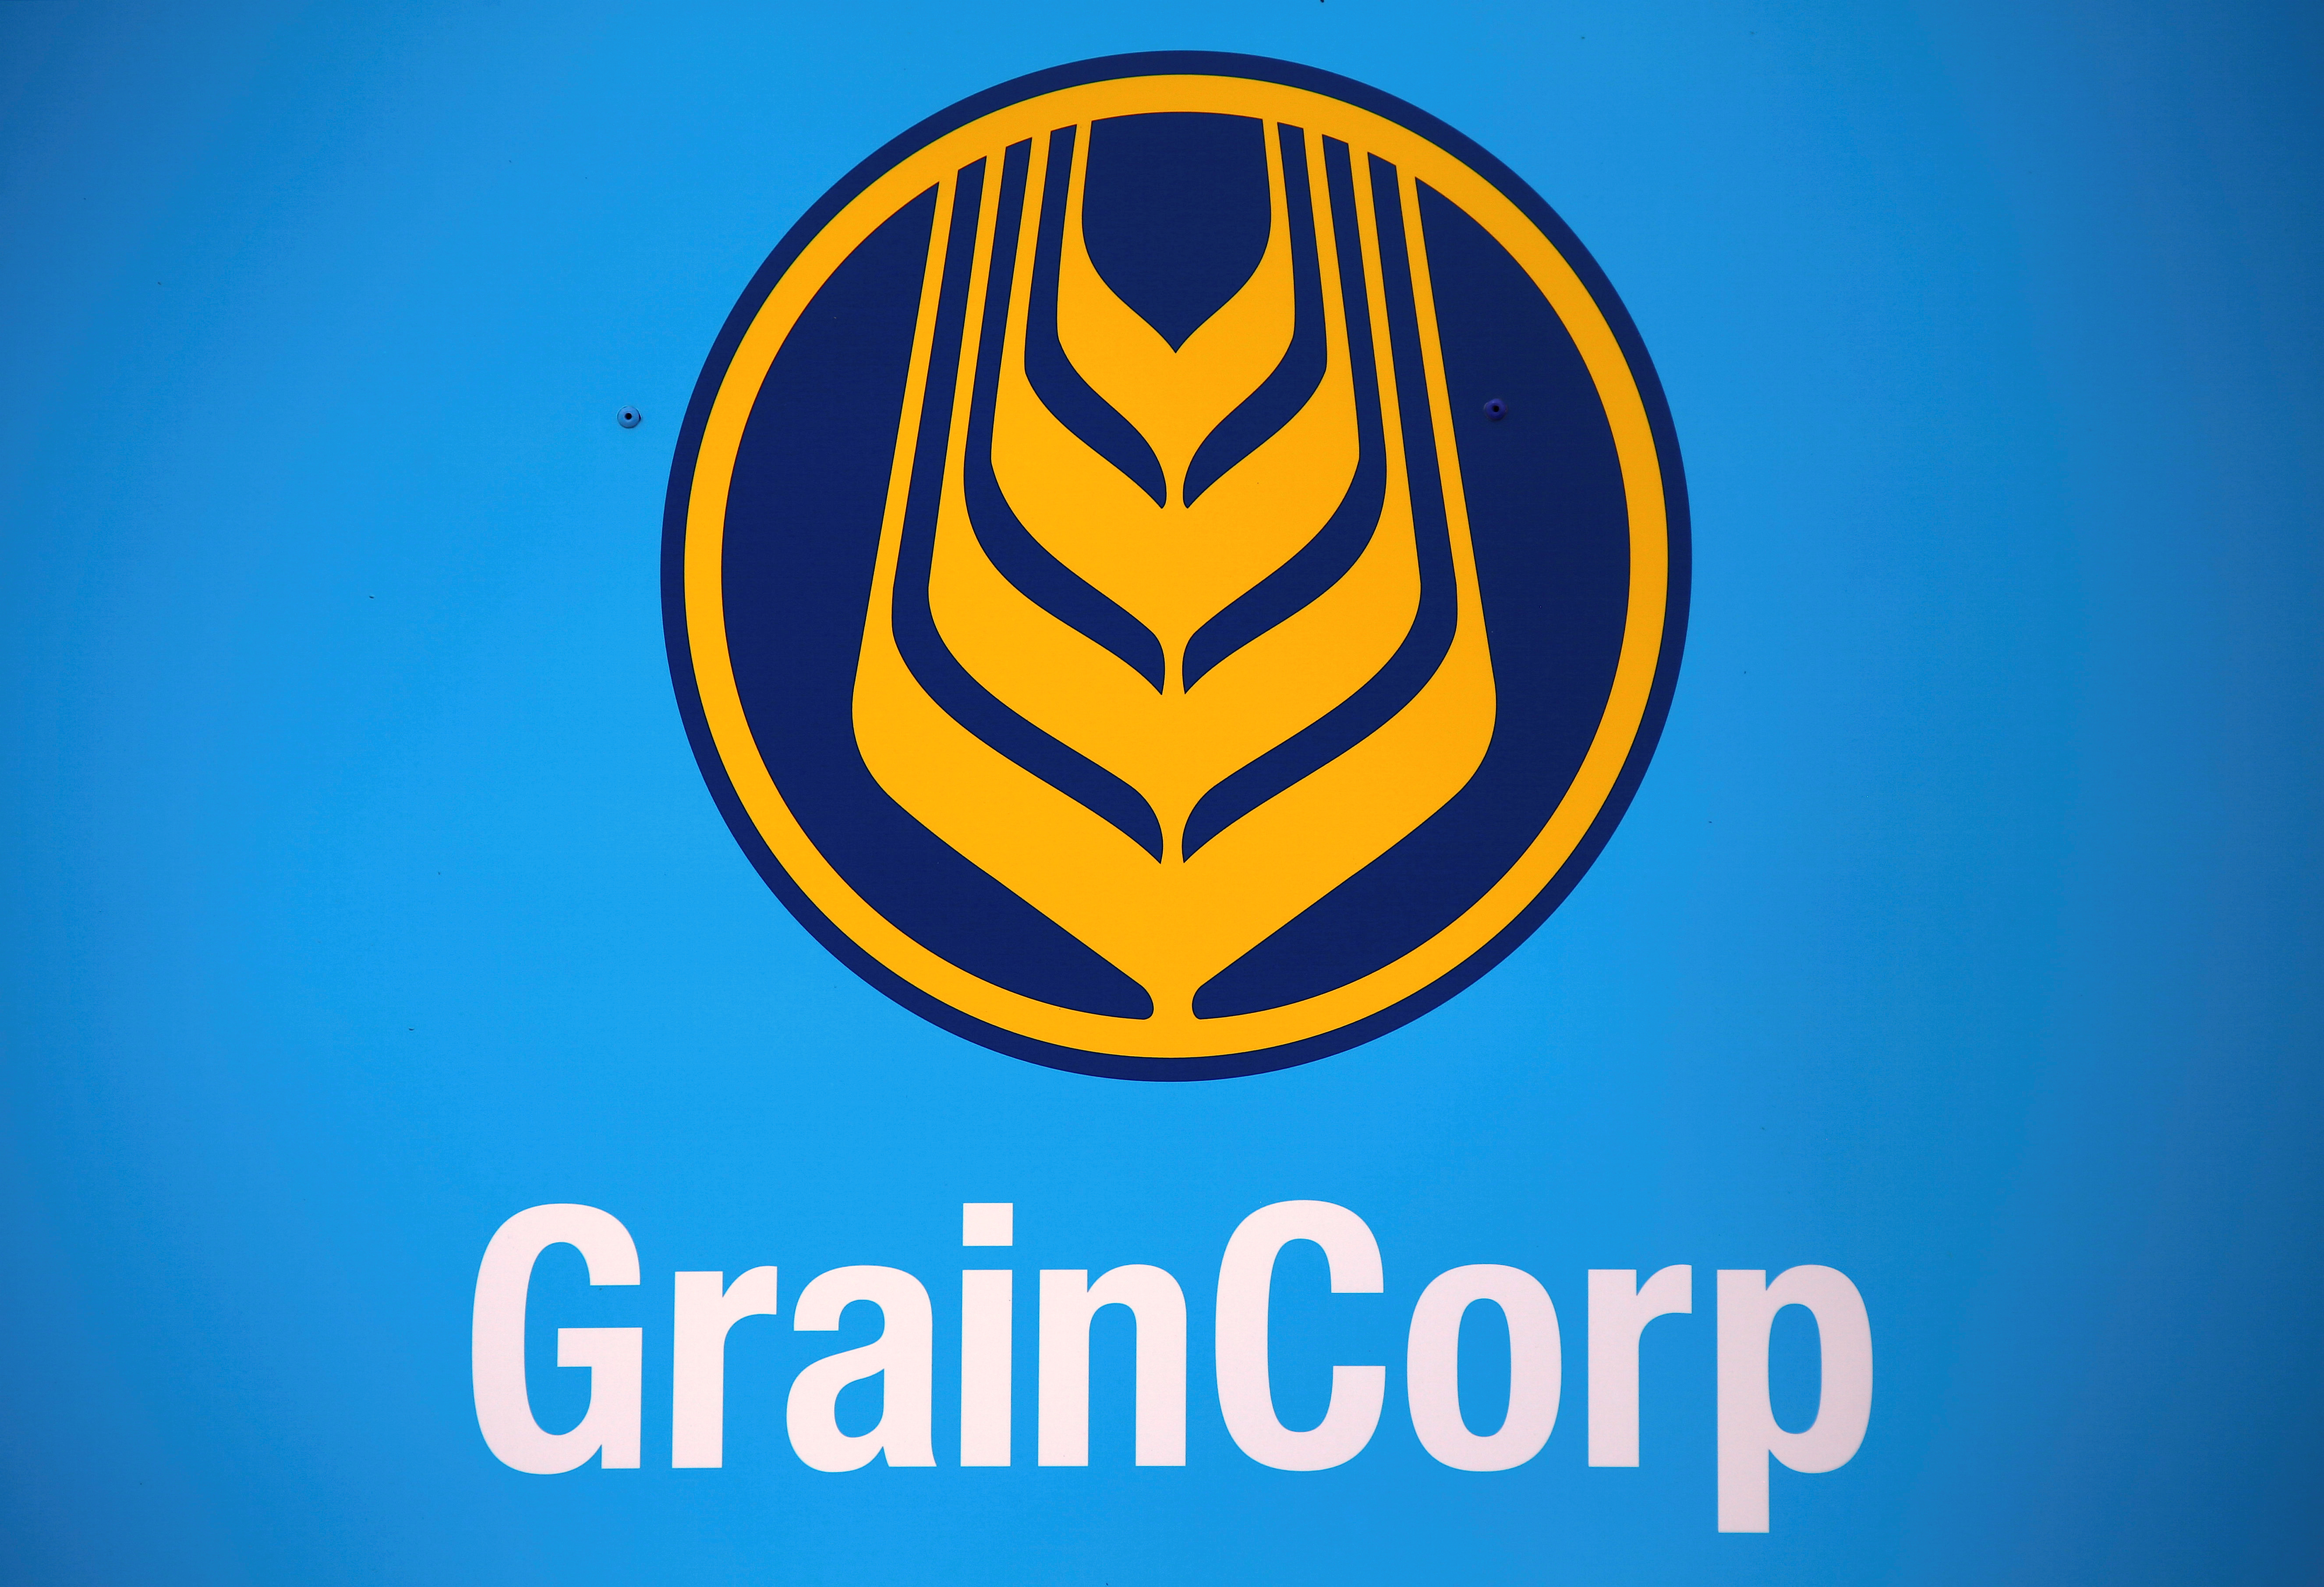 The logo for GrainCorp, Australia's largest listed bulk grain handler, adorns a sign at the Burren Junction depot located in the New South Wales town of Burren Junction, located north-west of Sydney in Australia